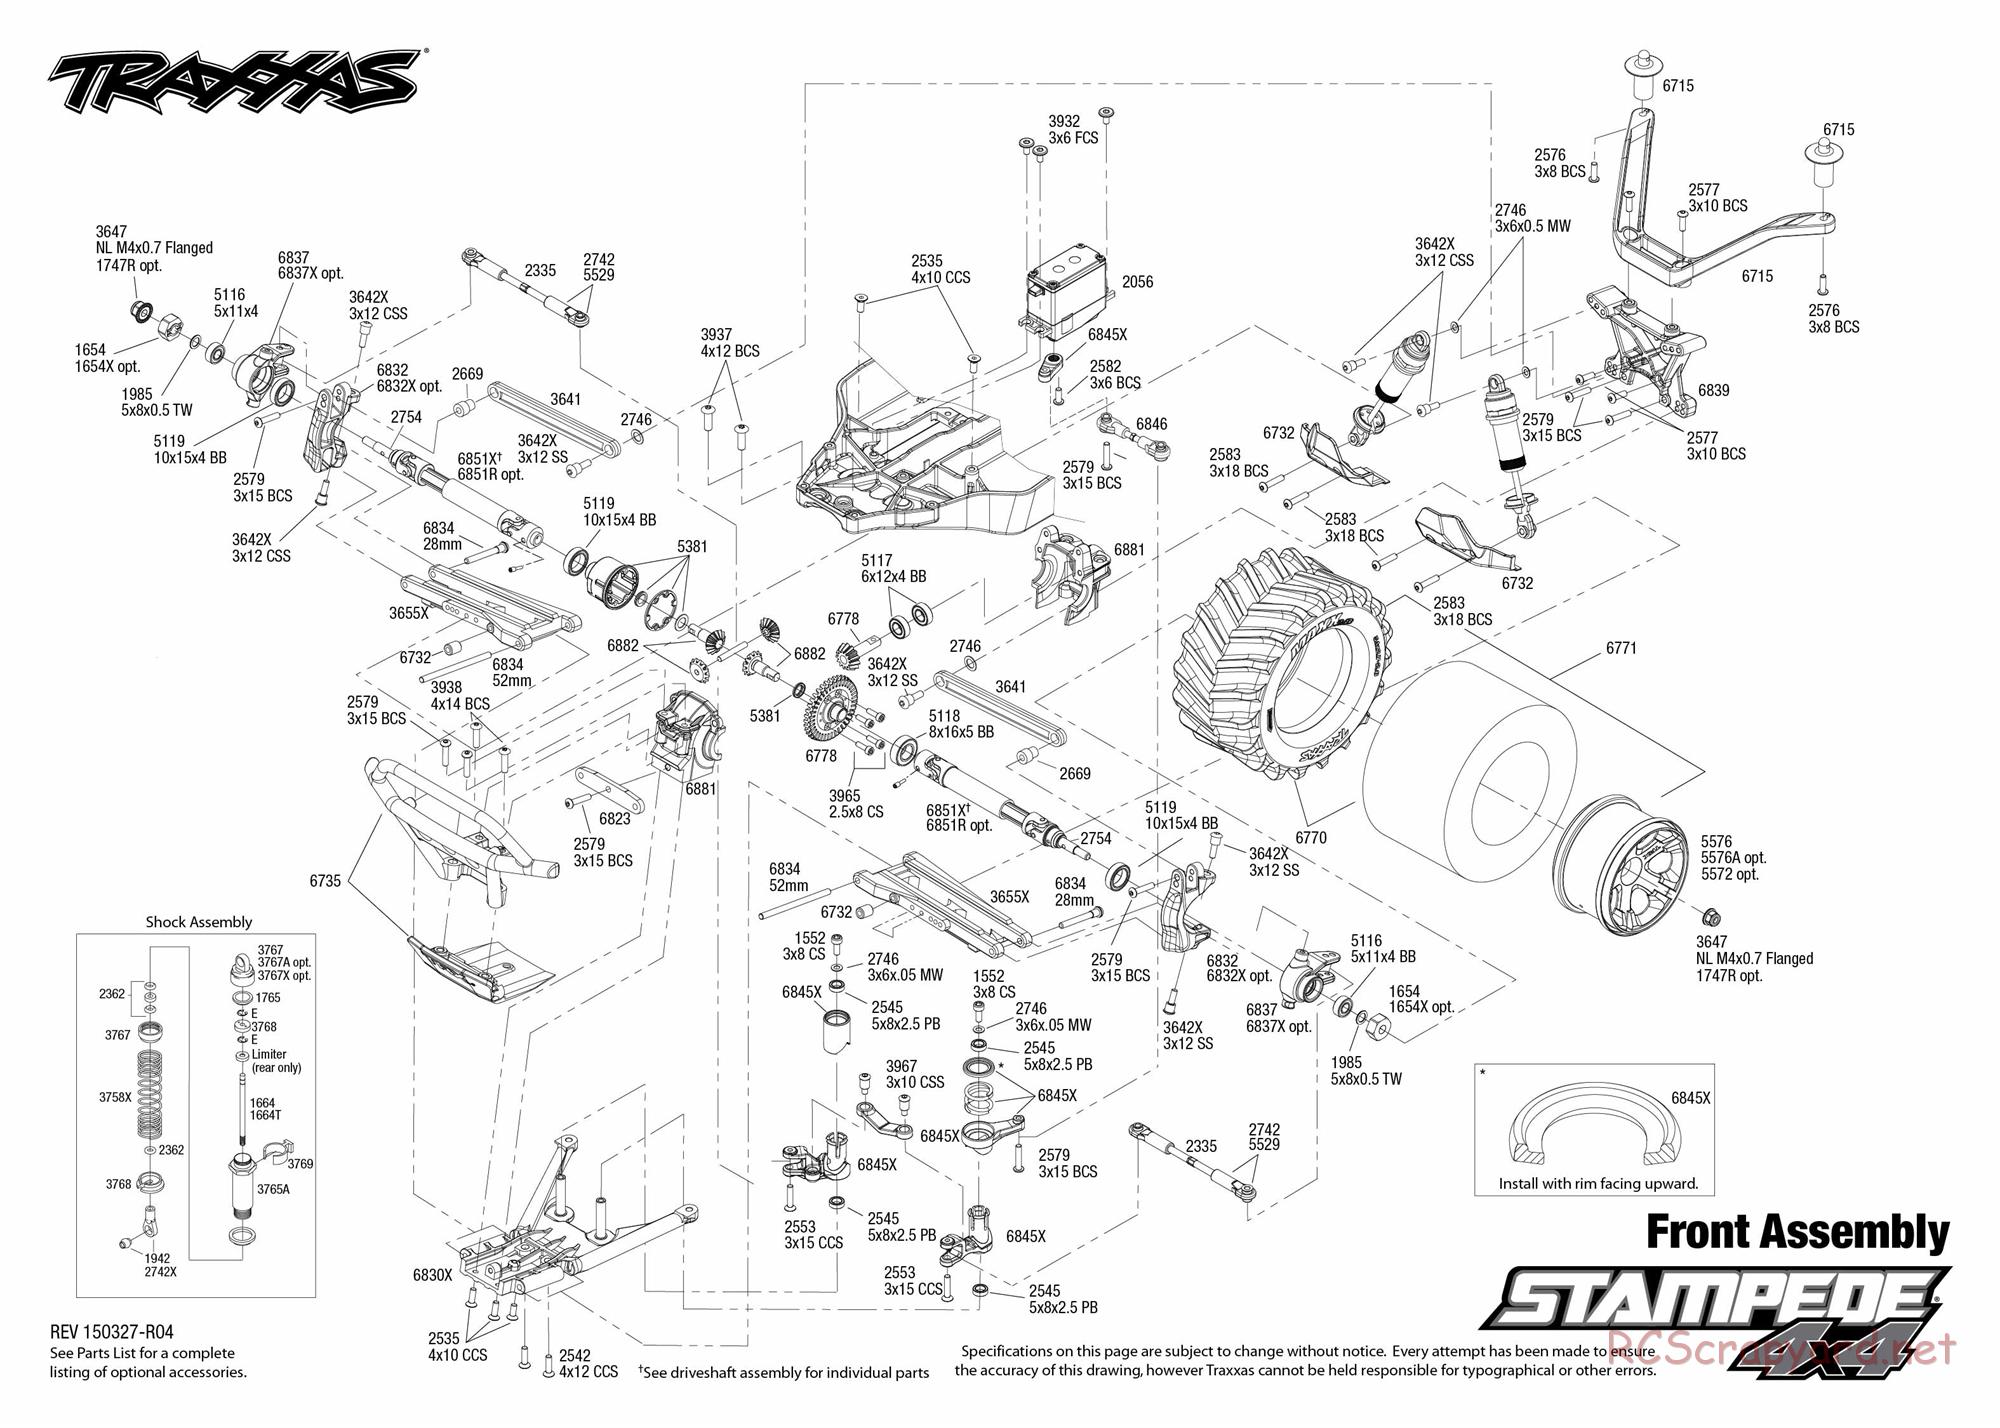 Traxxas - Stampede 4x4 (2013) - Exploded Views - Page 1